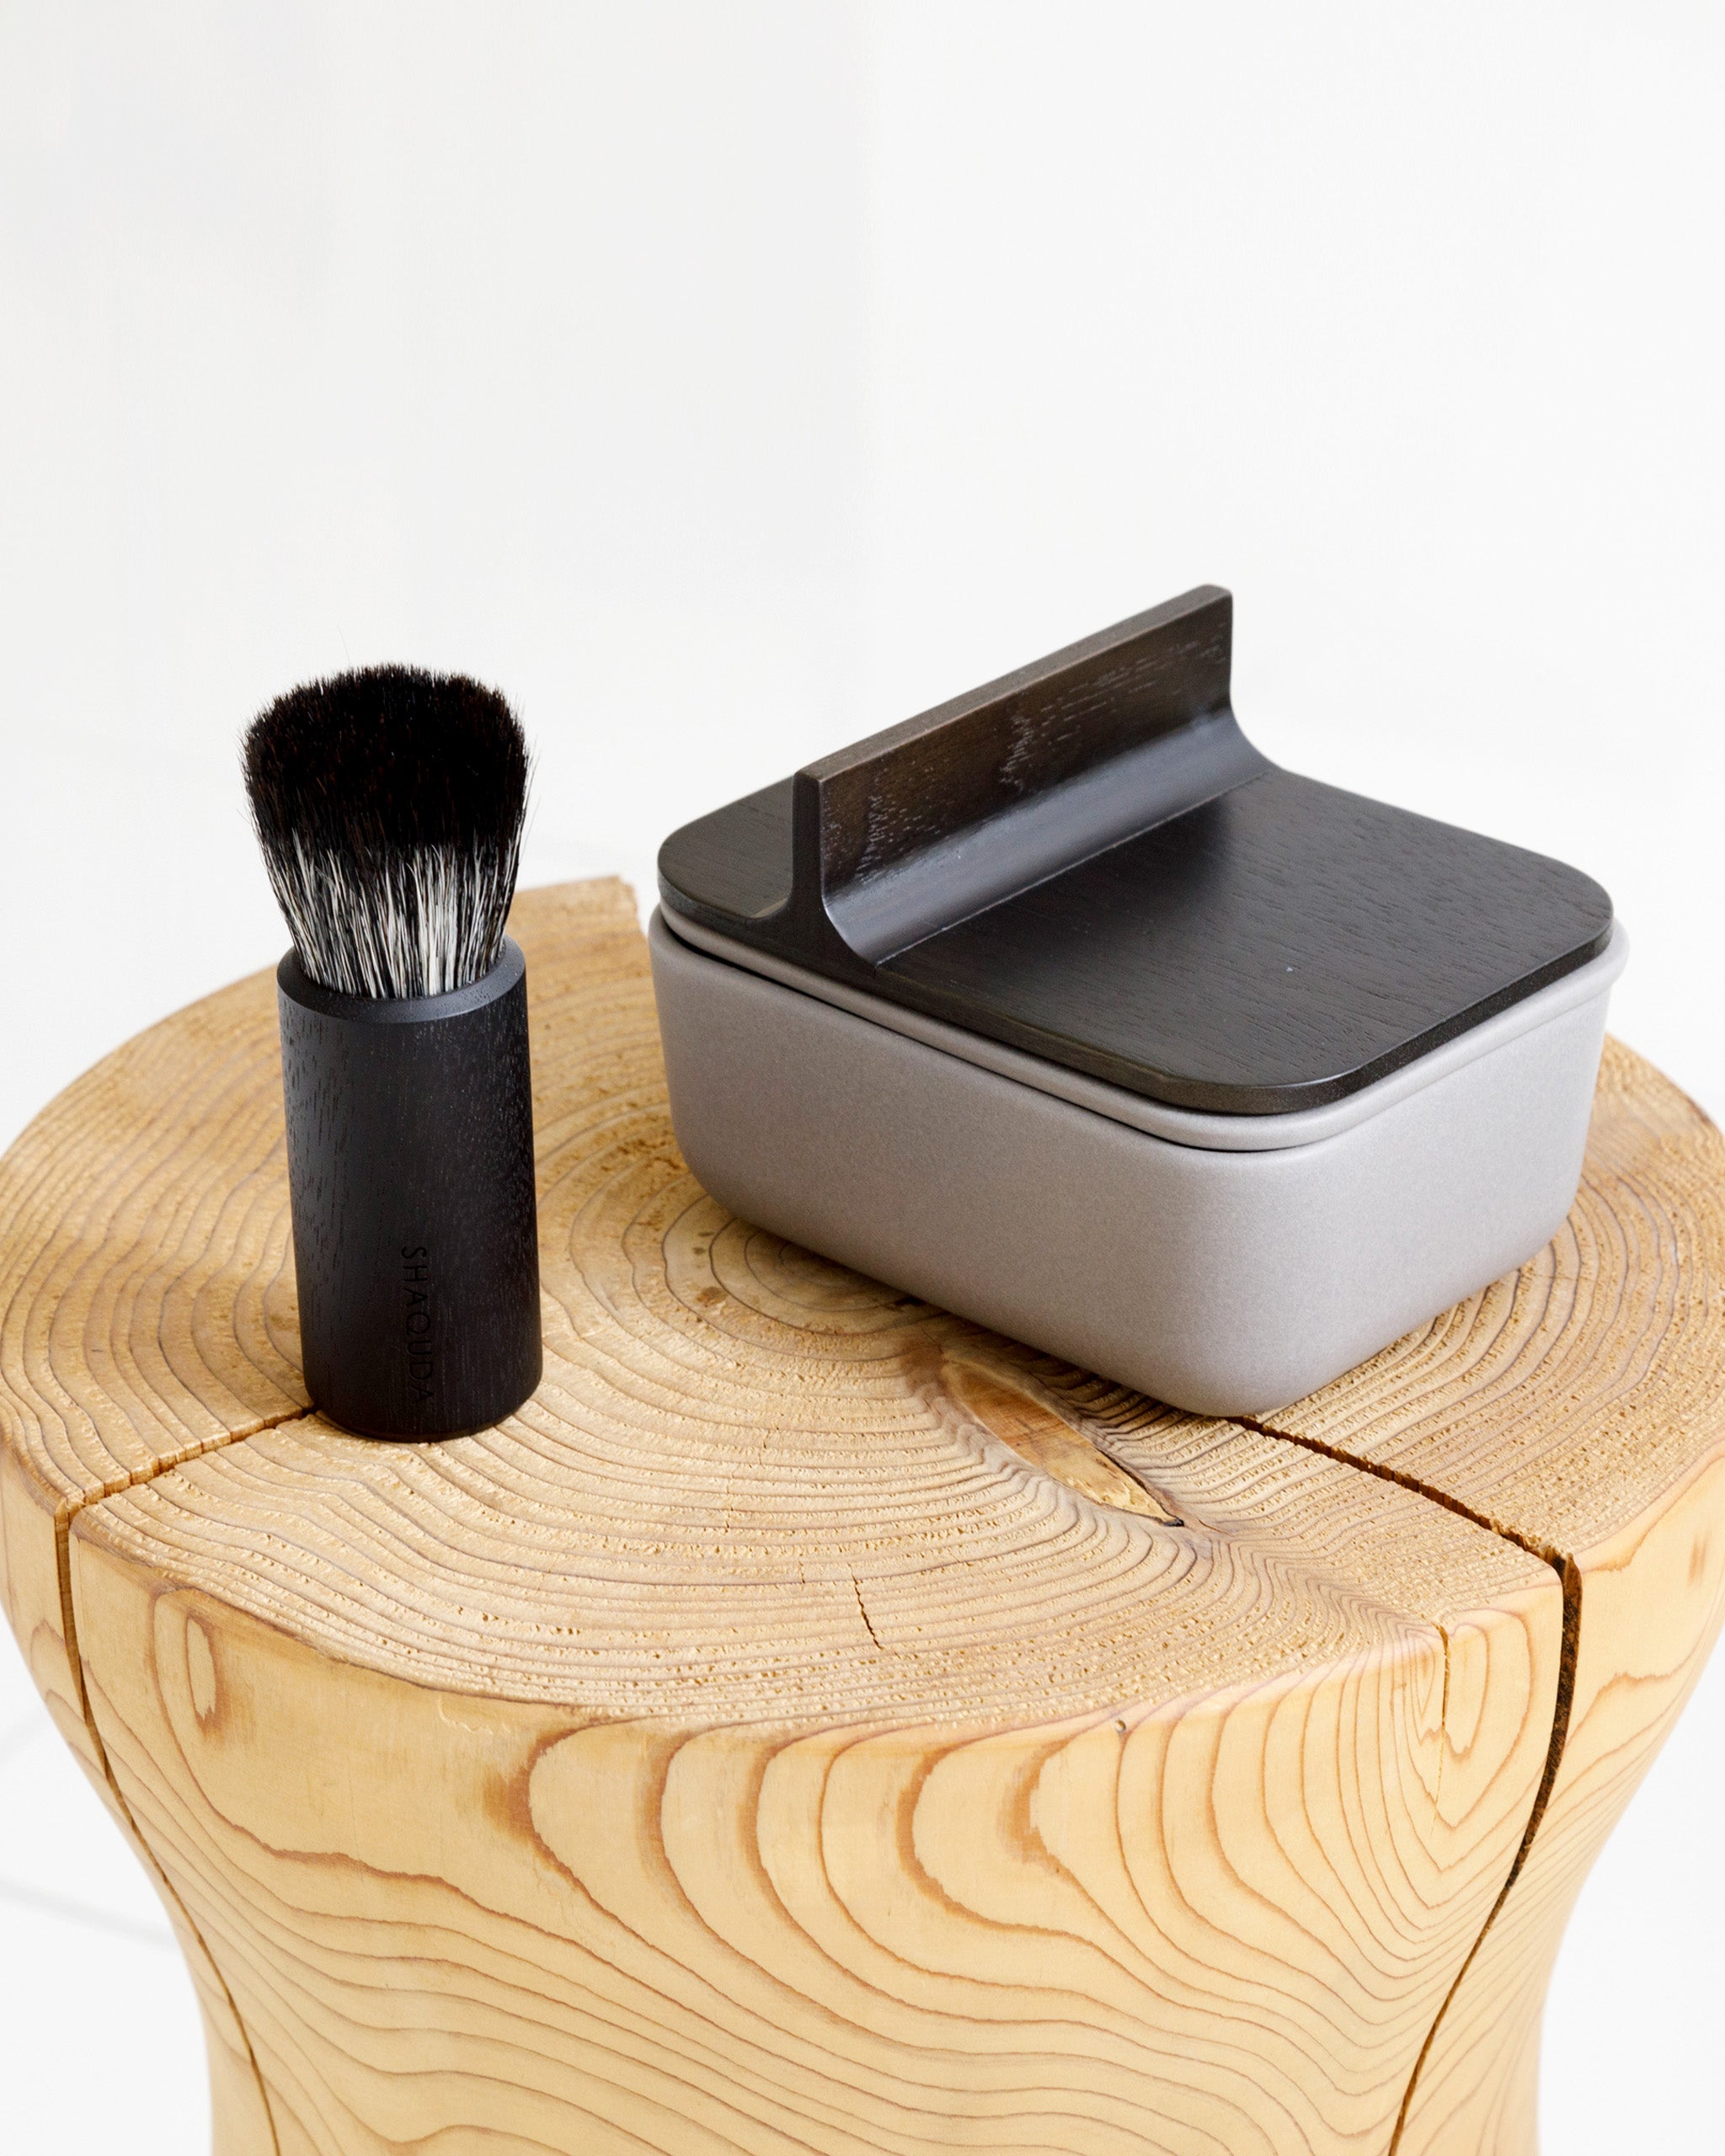 In situation image of hard Jiva face cleansing and shaving series with porcelain bowl and walnut, boar bristle, and goat hair brush by Shaquda on wood stump.